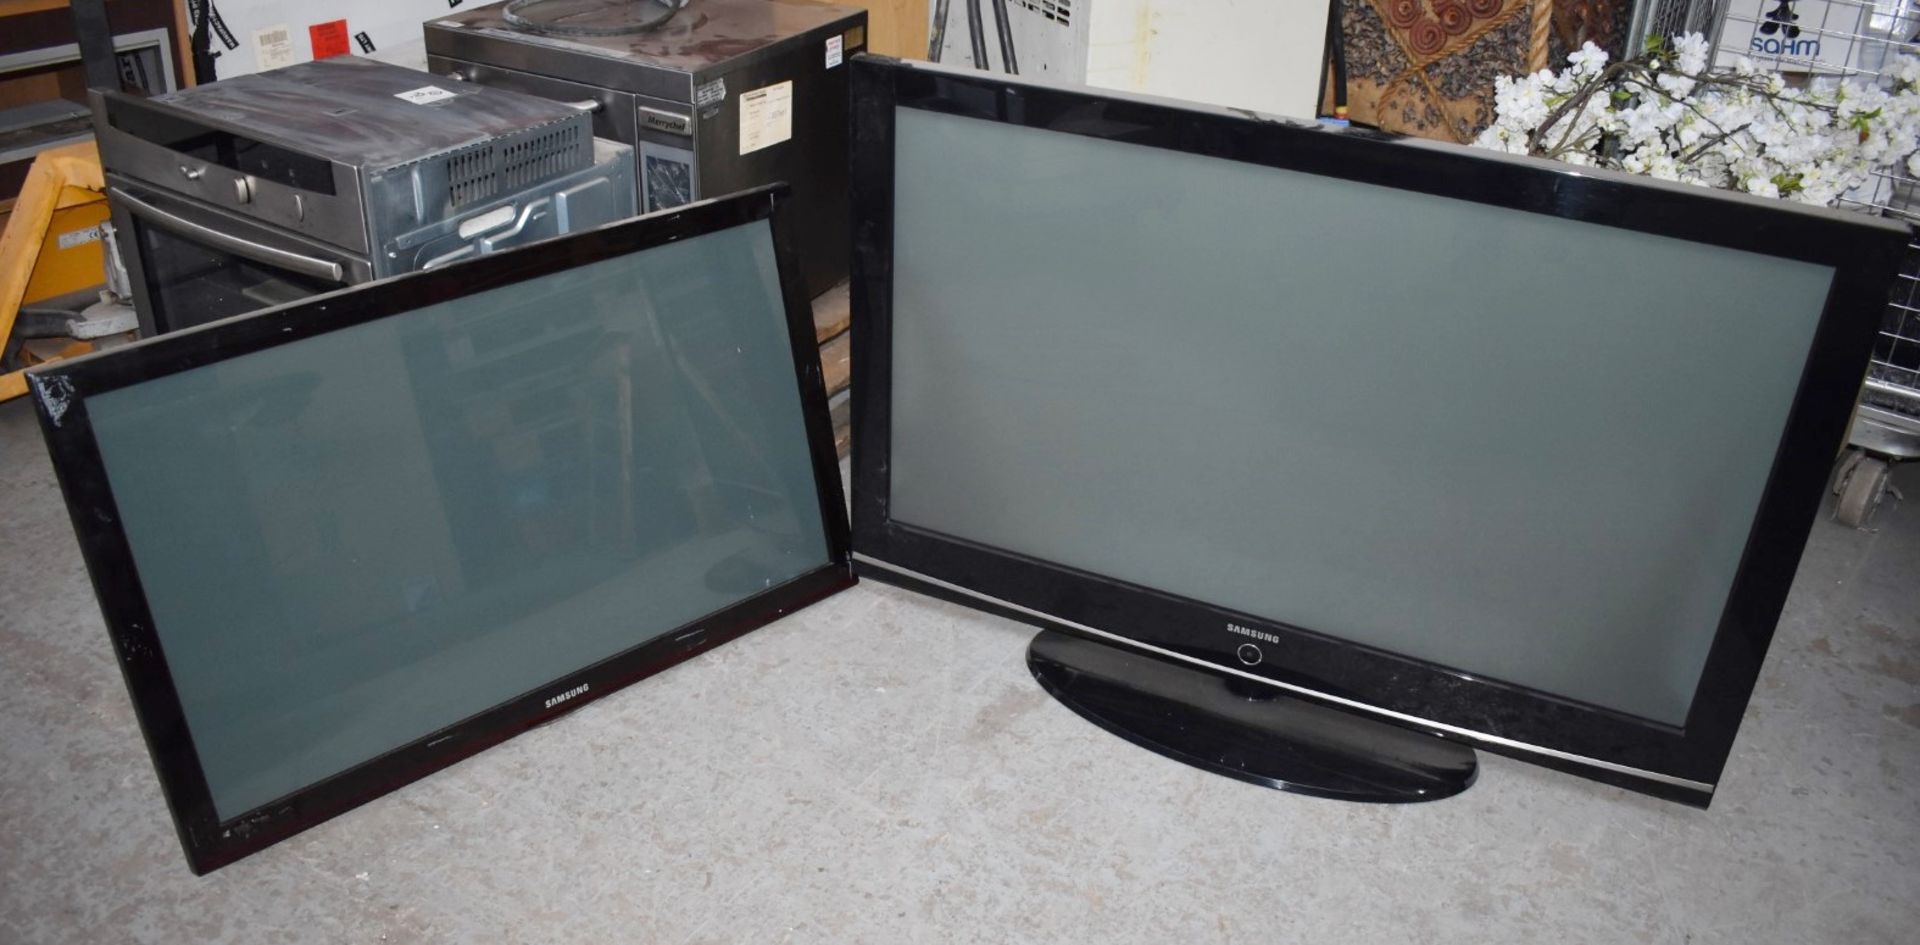 2 x Samsung Flatscreen Televisions - Includes 43 Inch and 50 Inch Sizes - CL011 - Location: